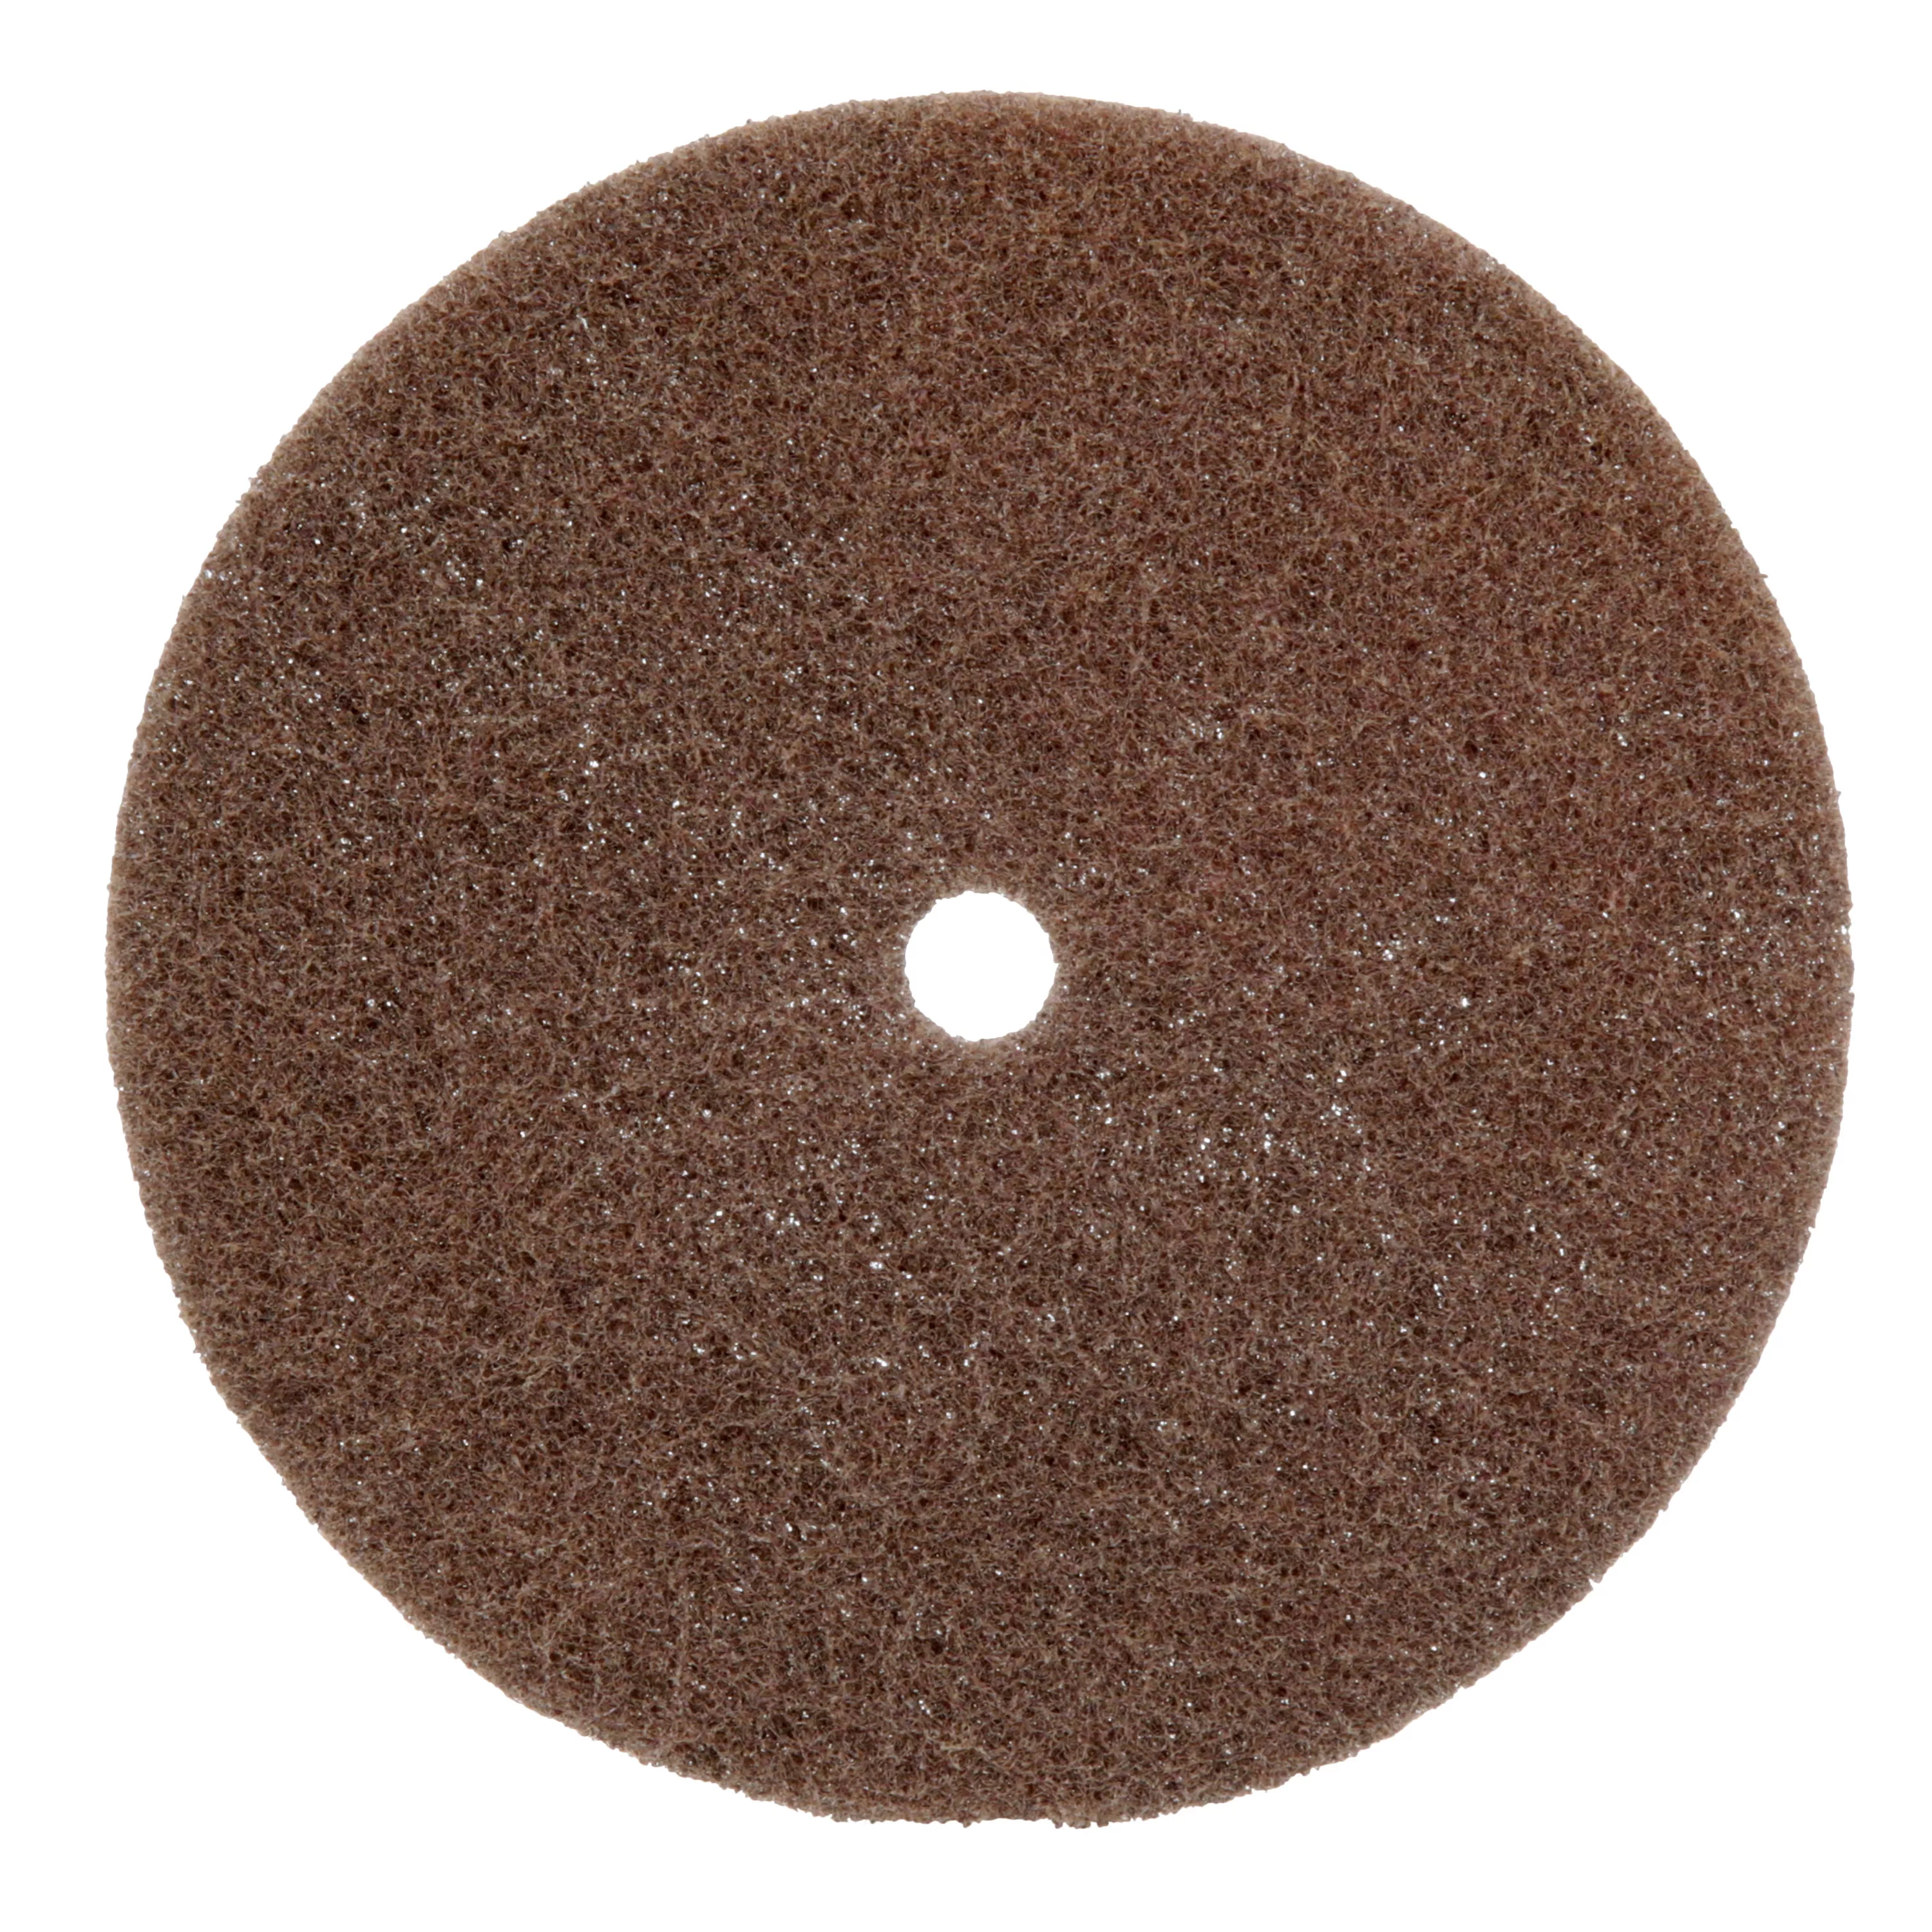 Standard Abrasives™ Buff and Blend AP Disc, 870710, 6 in x 1/2 in A MED,
10/Pac, 100 ea/Case